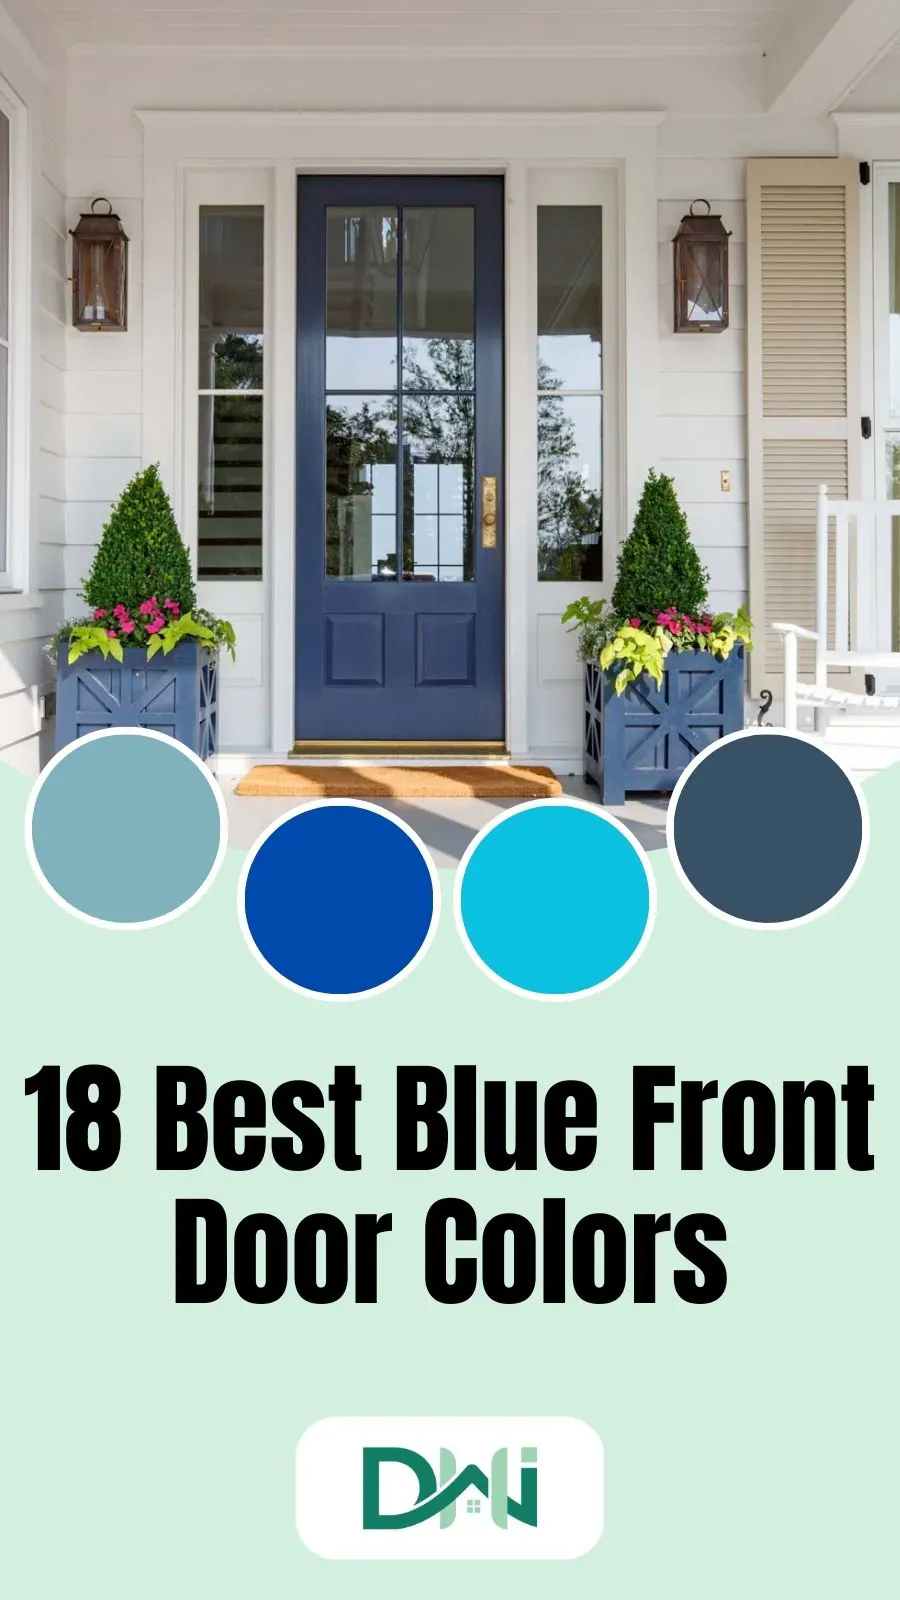 Discover the benefits of using blue front door color for home exteriors, including tips for selecting the right shade, complementary colors and styling ideas.